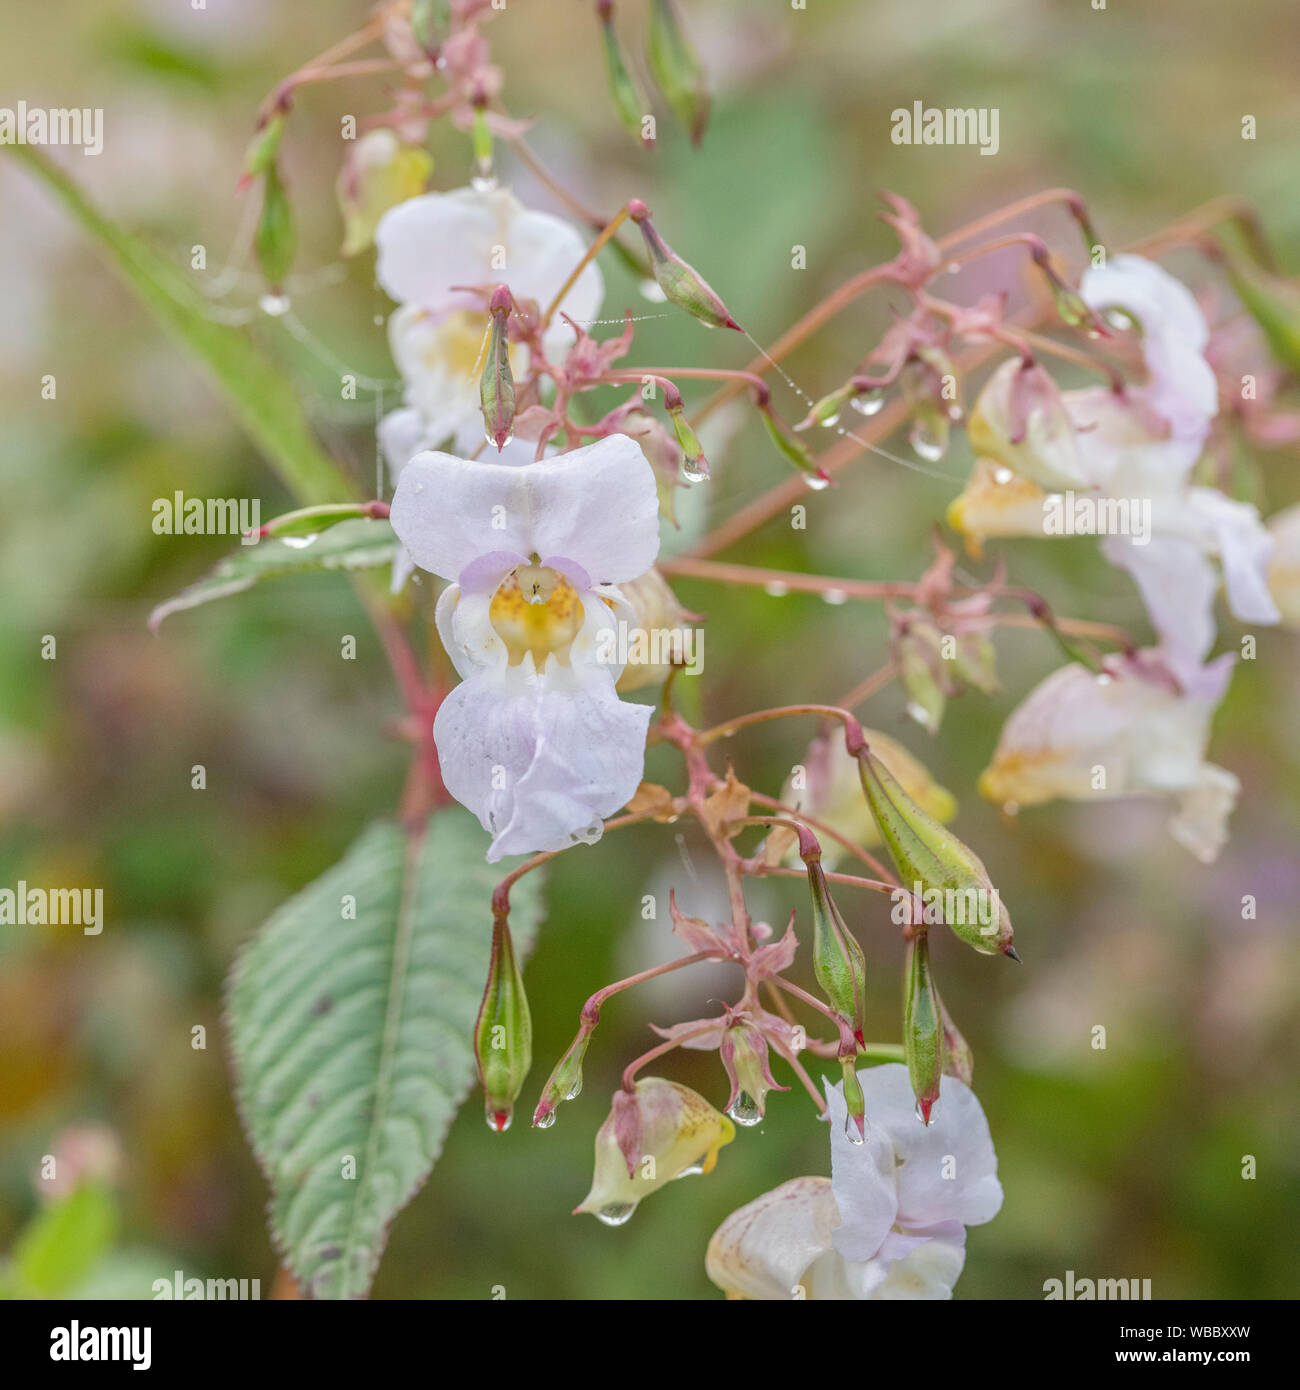 Flowers and upper leaves of troublesome Himalayan Balsam / Impatiens glandulifera. Likes damp soils / ground, riversides, river banks, hygrophilous. Stock Photo